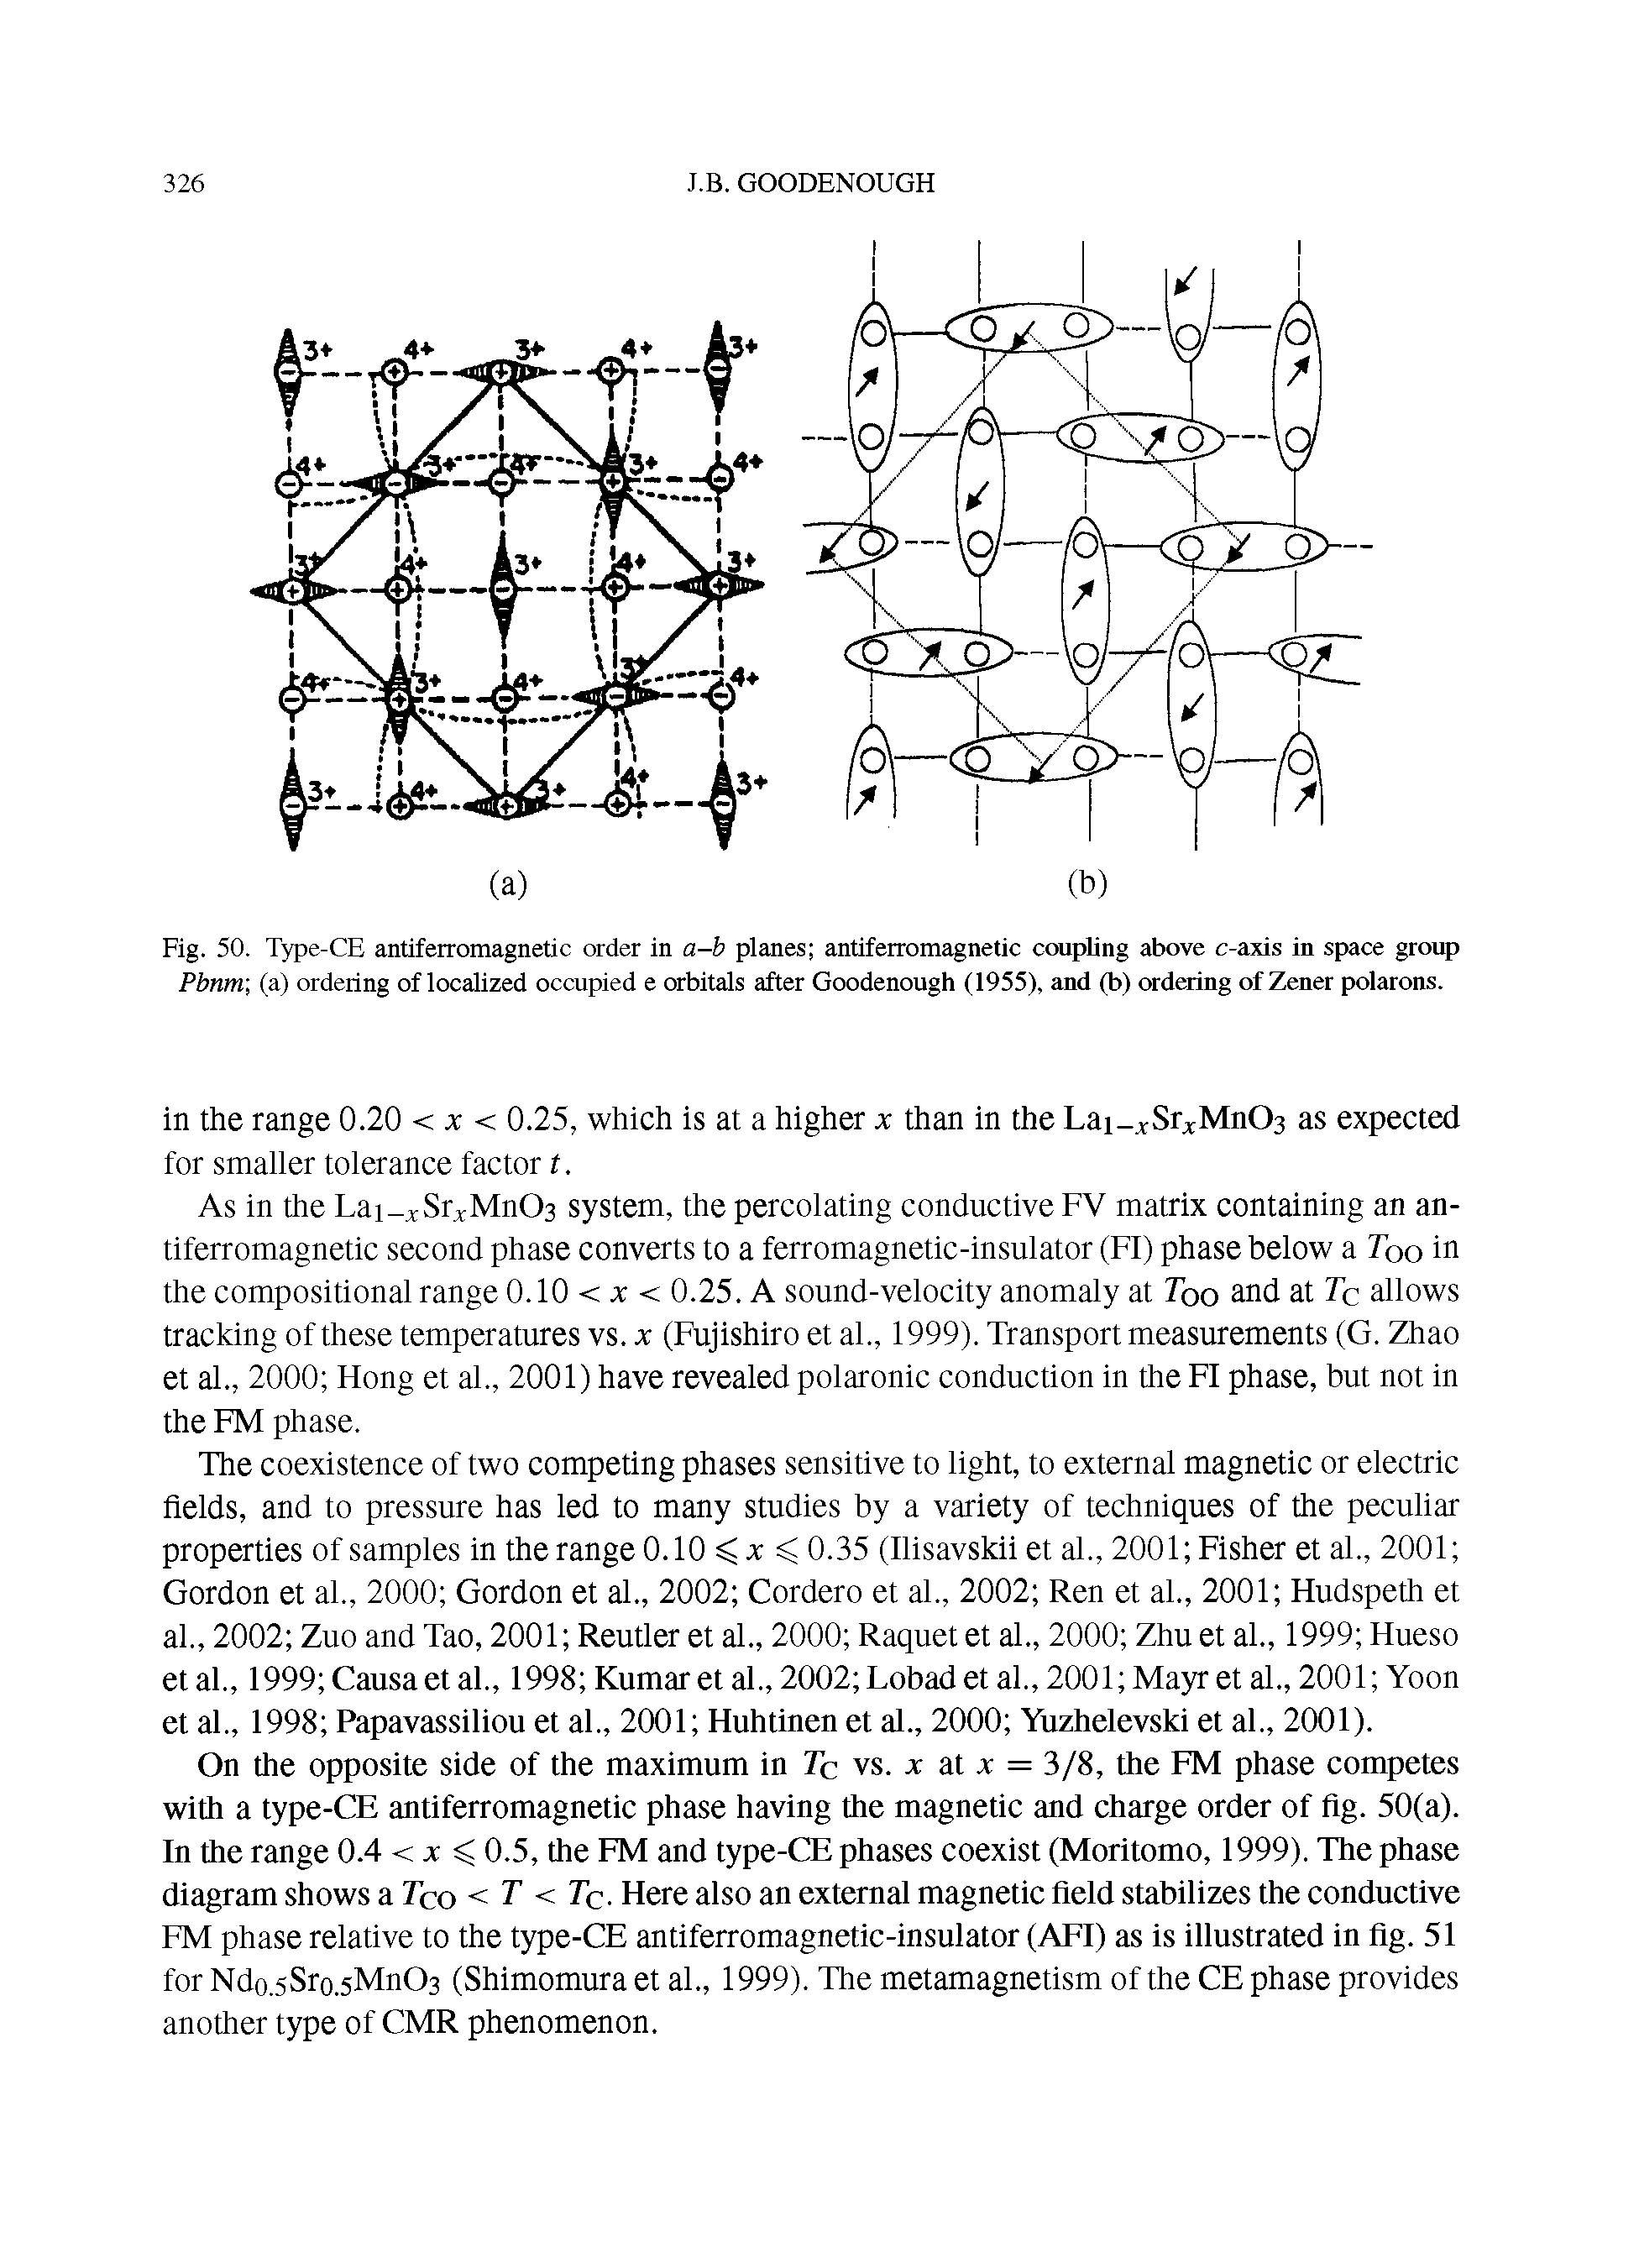 Fig. 50. Type-CE antiferromagnetic order in a-b planes antiferromagnetic coupling above c-axis in space group Pbnm (a) ordering of localized occupied e orbitals after Goodenough (1955), and (b) ordering of Zener polarons.